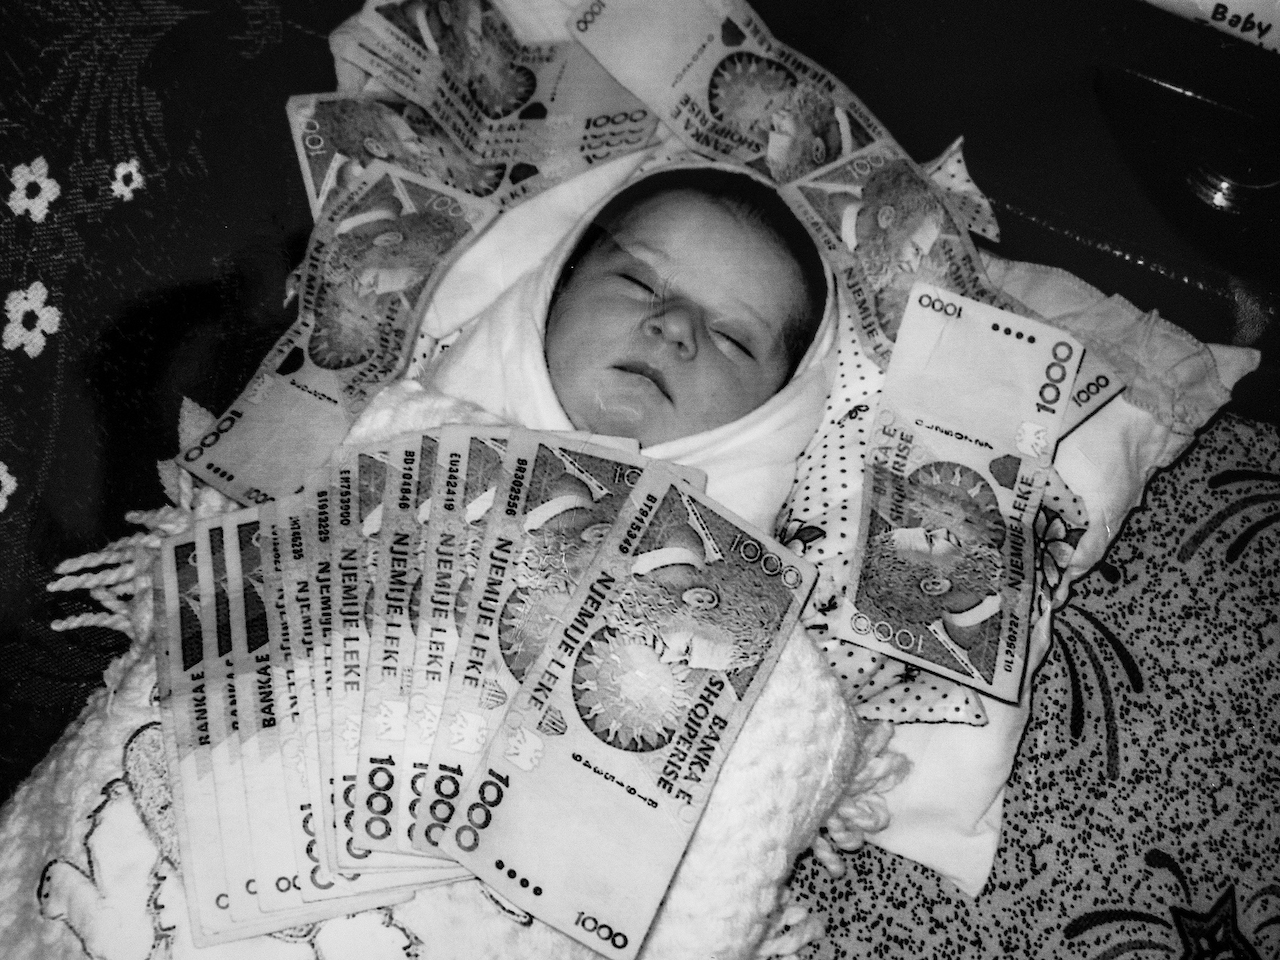 Just born baby boy. As a tradition relatives give as gifts to the infant and the new parents money. Bulqiza /Albania 2014